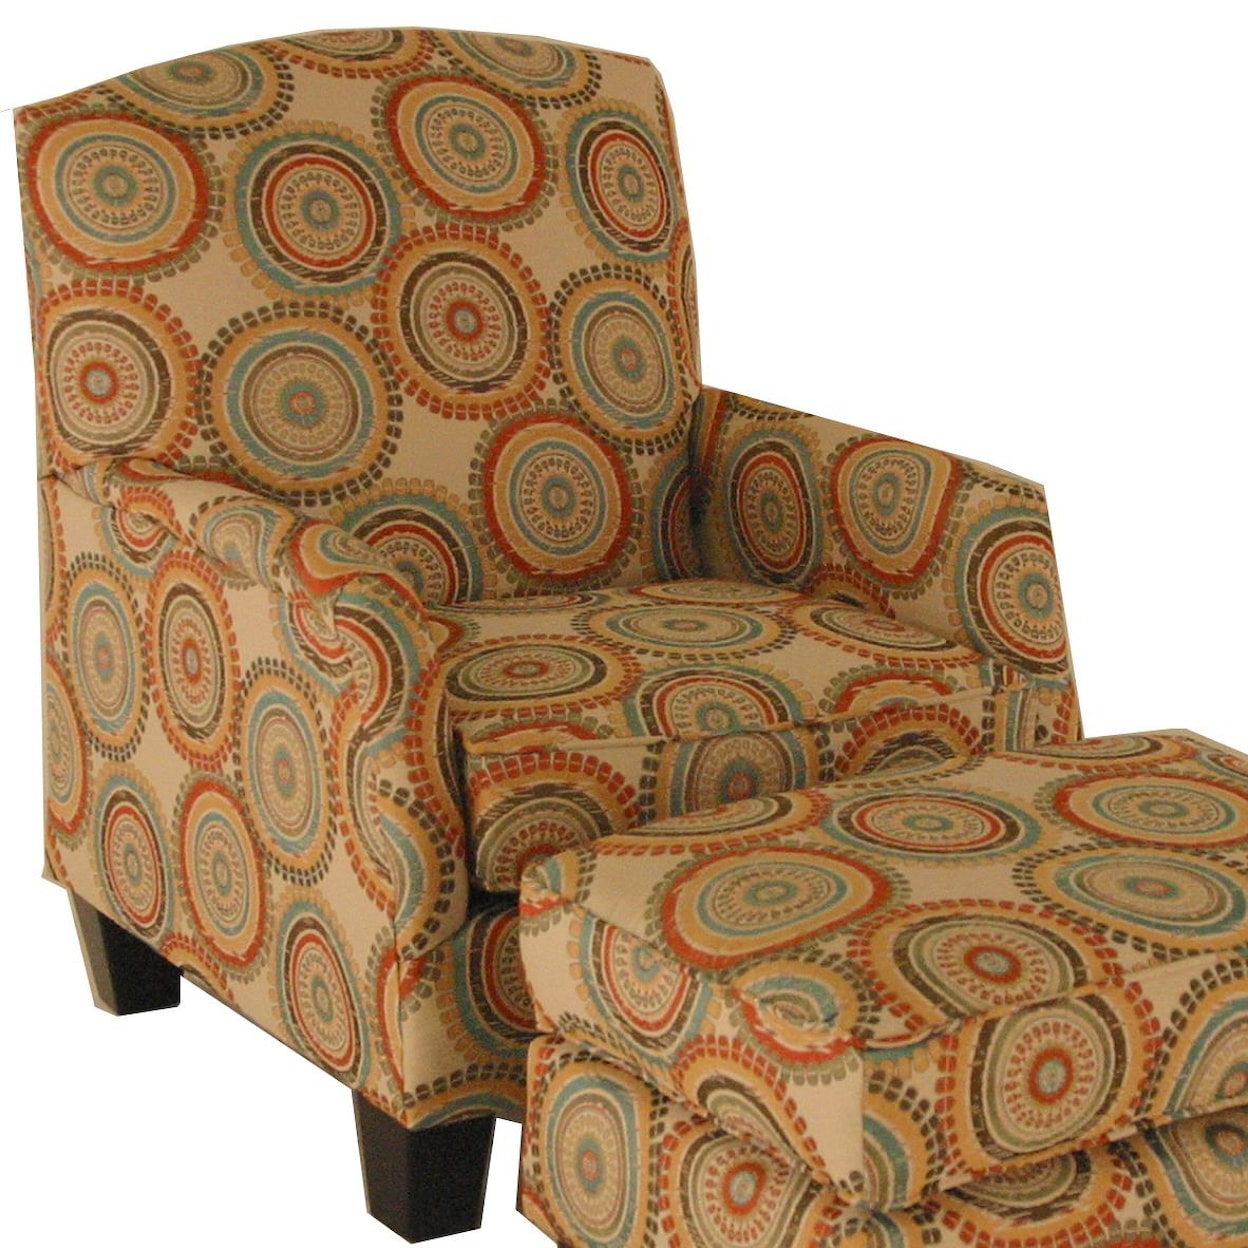 Chairs America Accent Chairs and Ottomans Transitional Chair